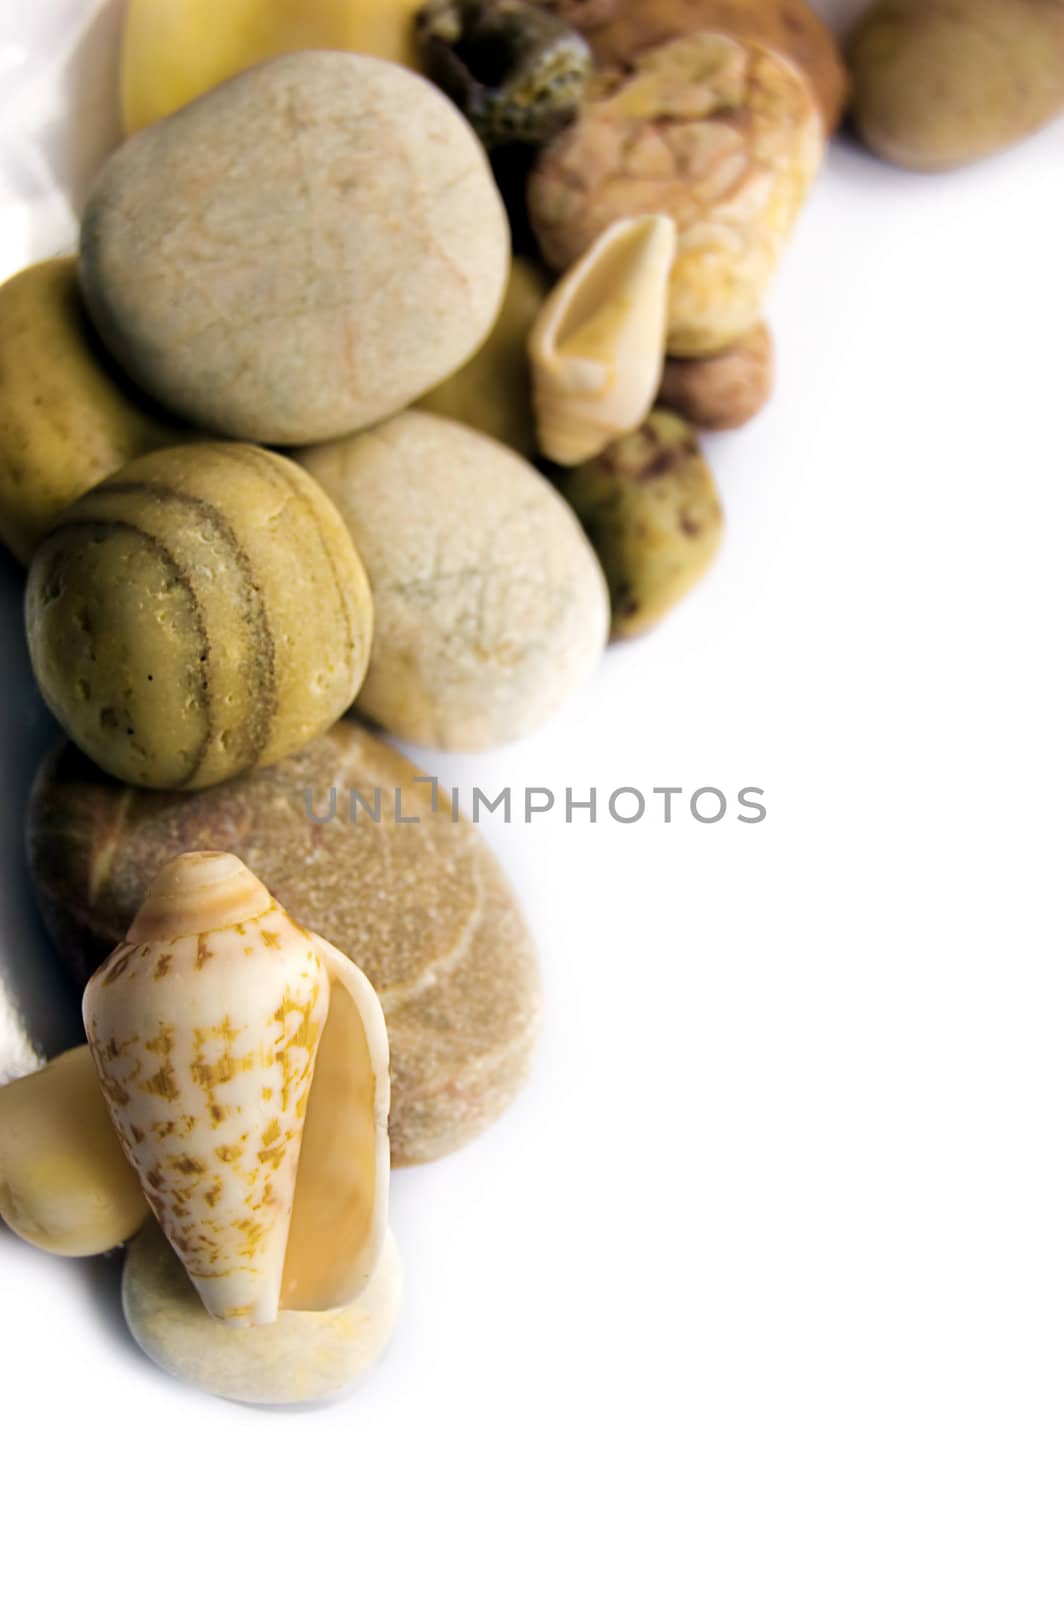 Assorted sea shells and stones over white with copy space